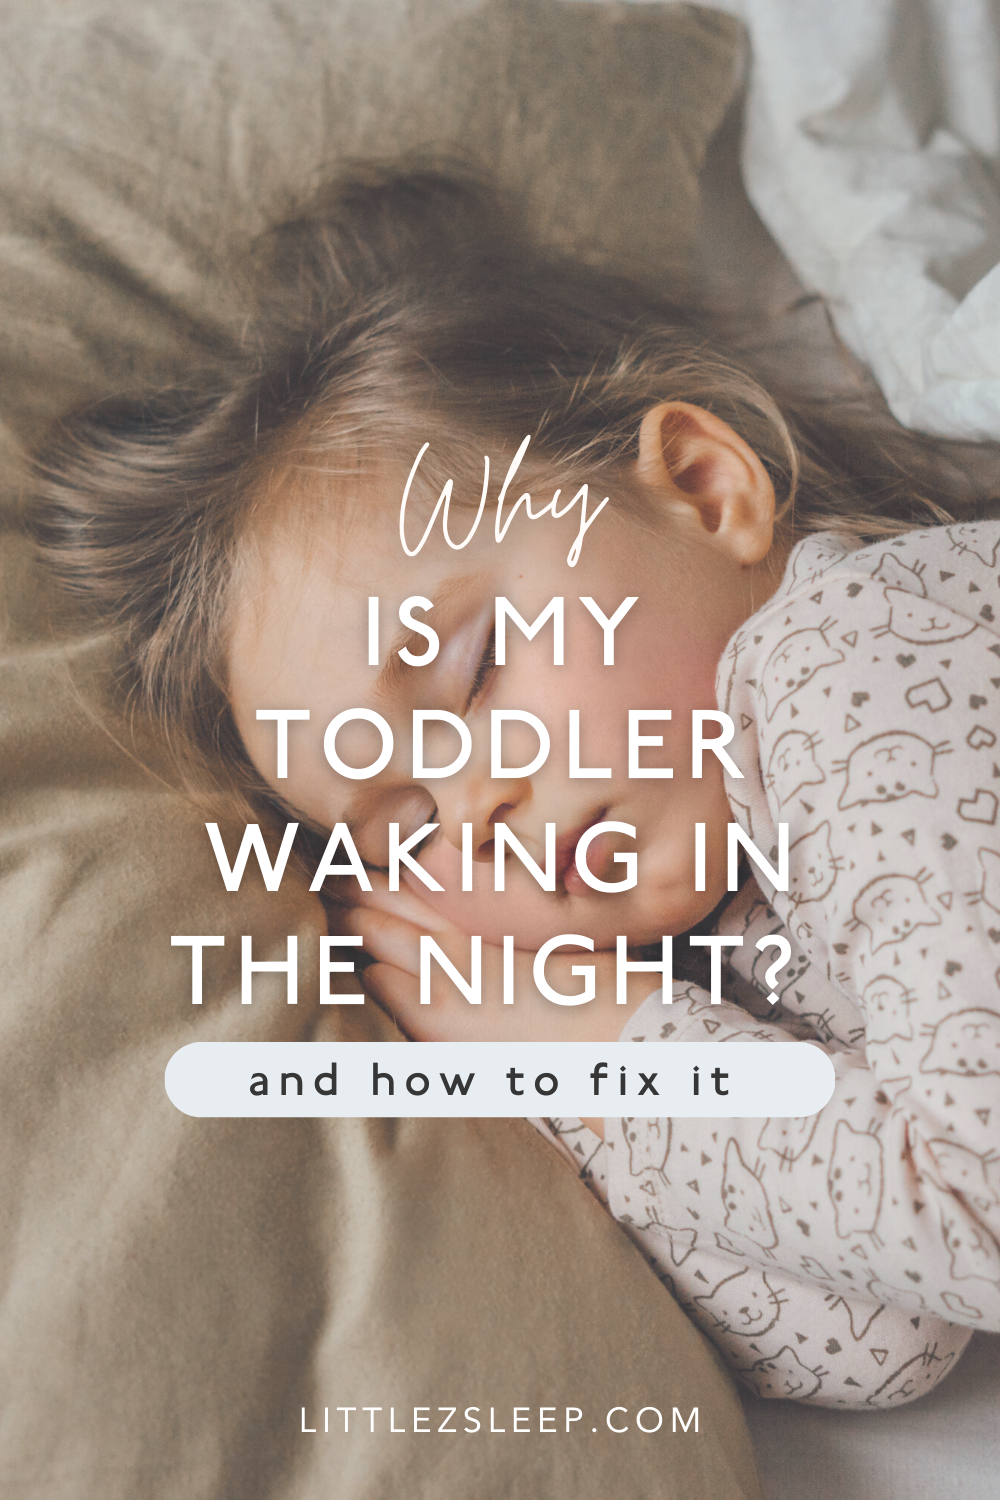 Why is my toddler waking in the night? 